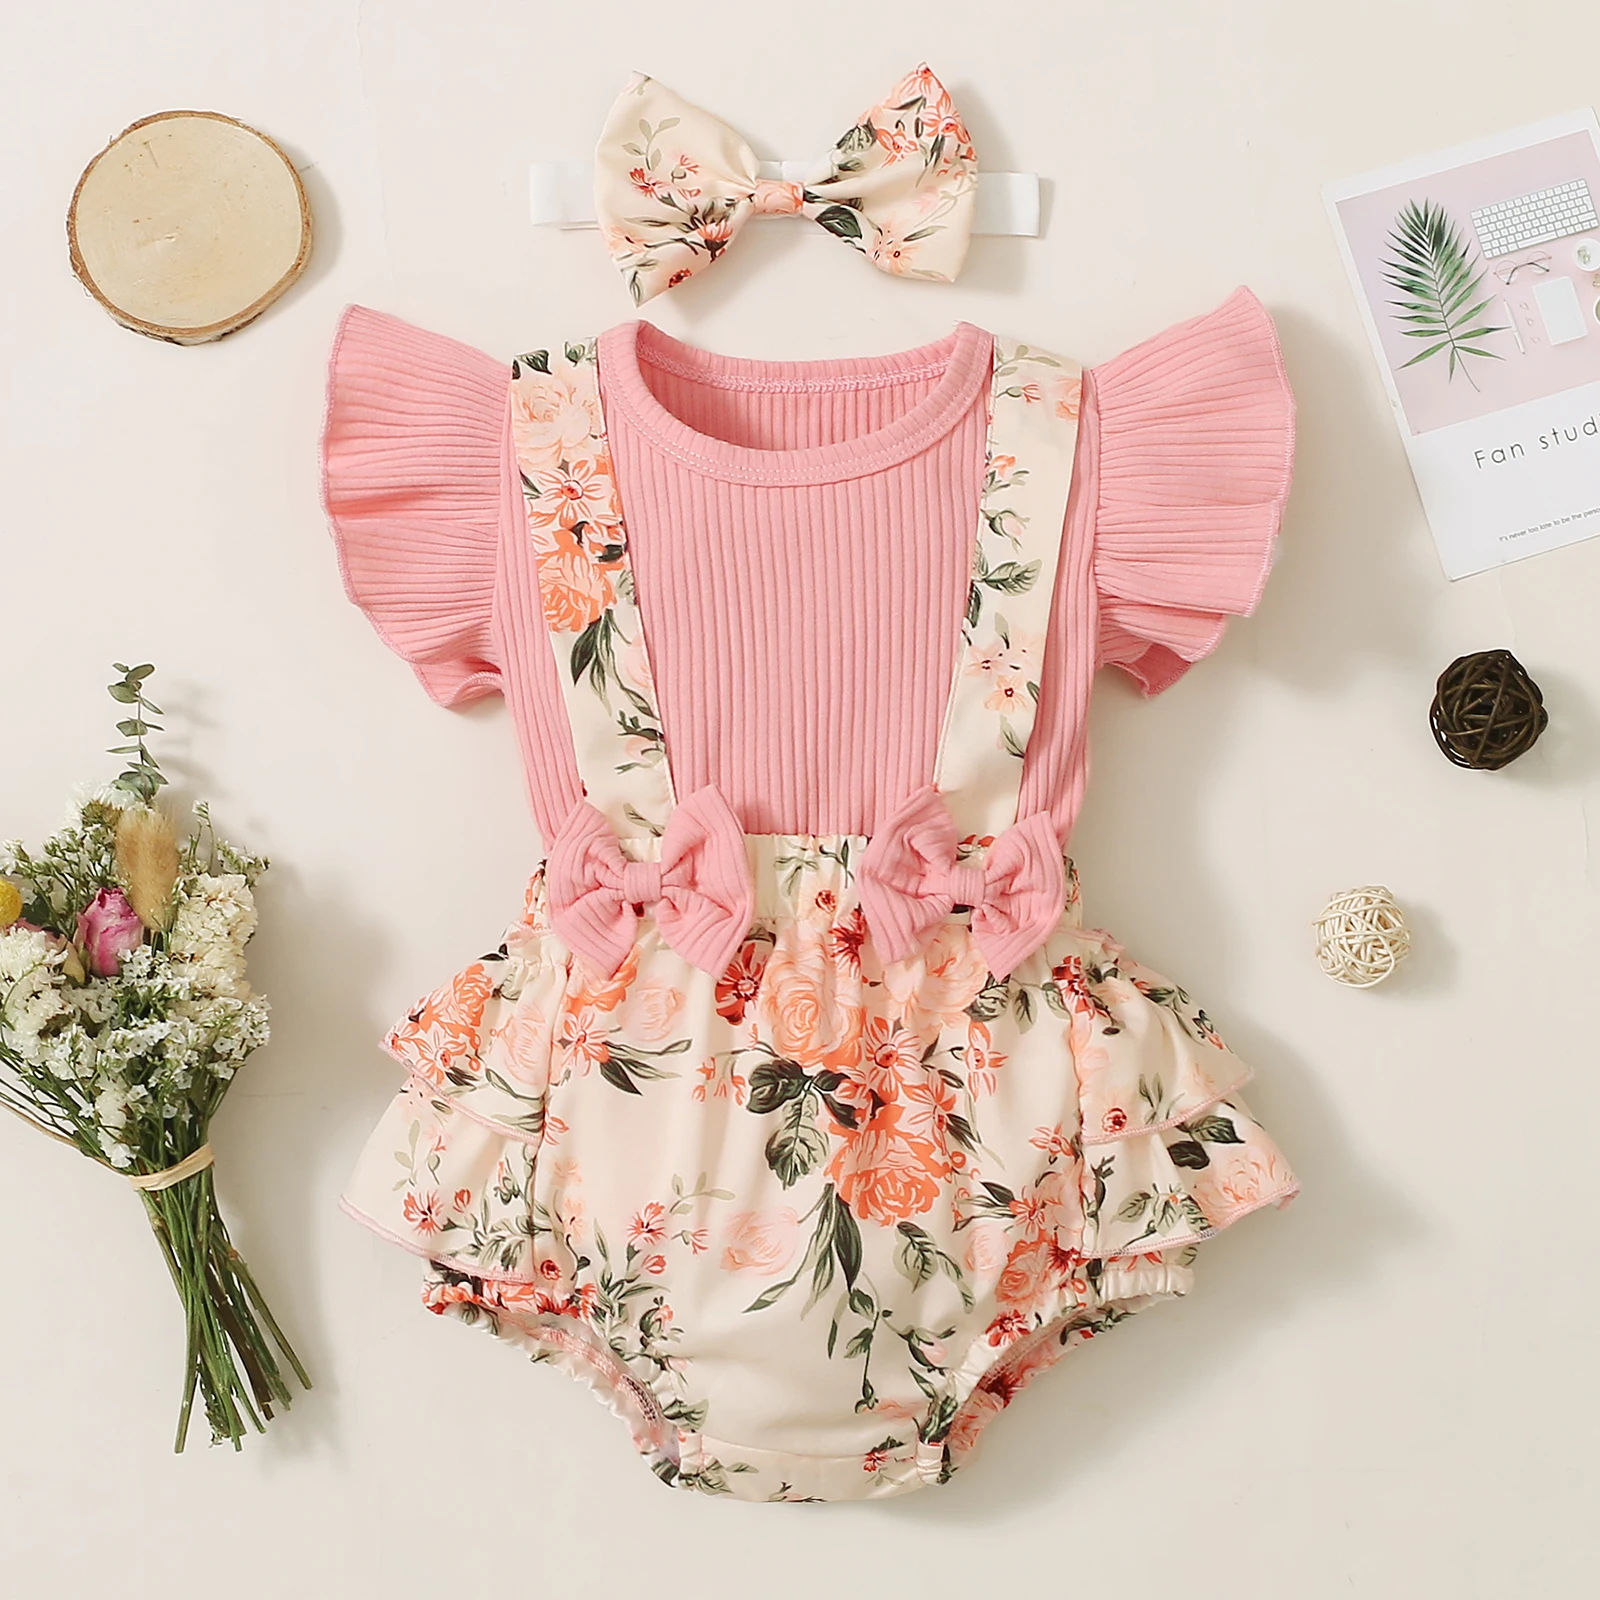 0-18M Newborn Baby Girls Summer Cotton Clothes Sets Ruffled Short-Sleeved Top + Suspender Skirt 3pcs Outfits For Baby Girls